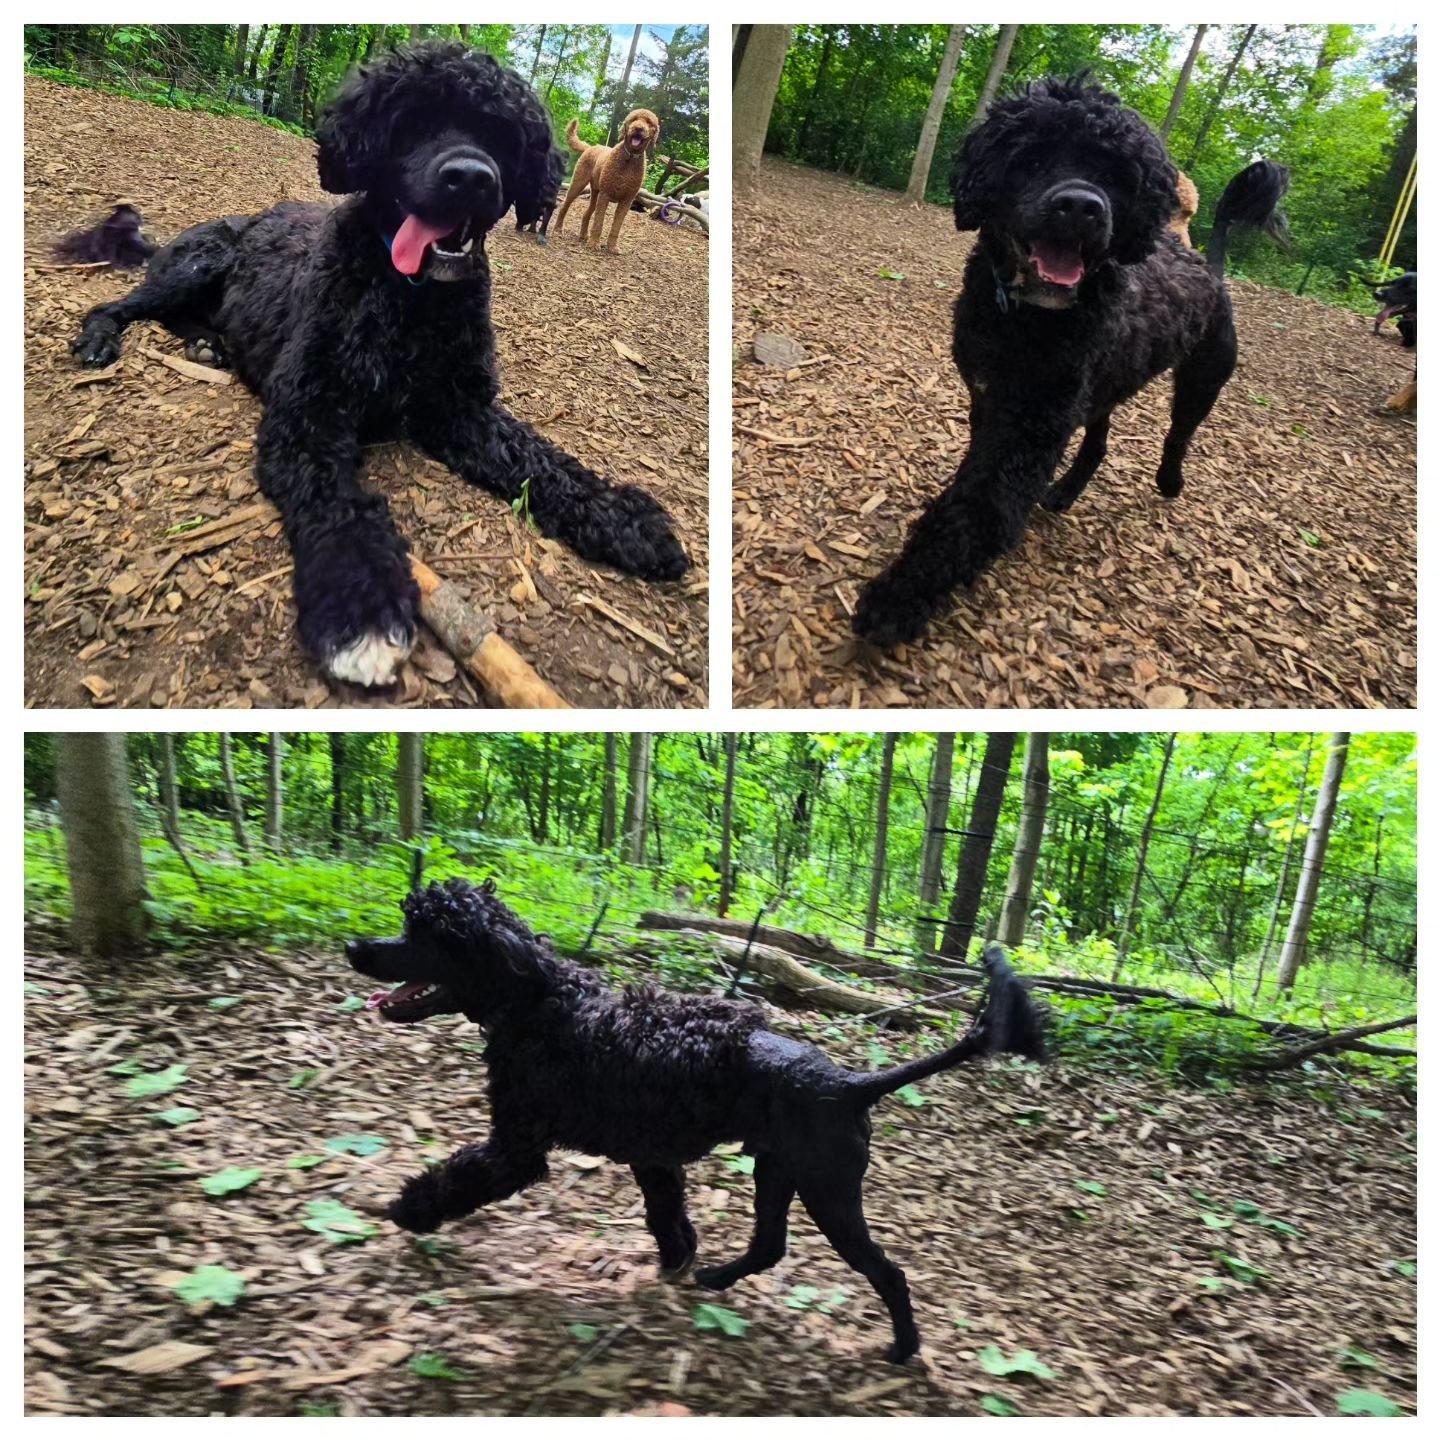 Please welcome our newest pack member, Puddle! 🥳 #packmember  #packplaytime  #dogadventures  #portuguesewaterdog  #happypup #forestfun  #ypps  #yourpersonalpacksitterlc